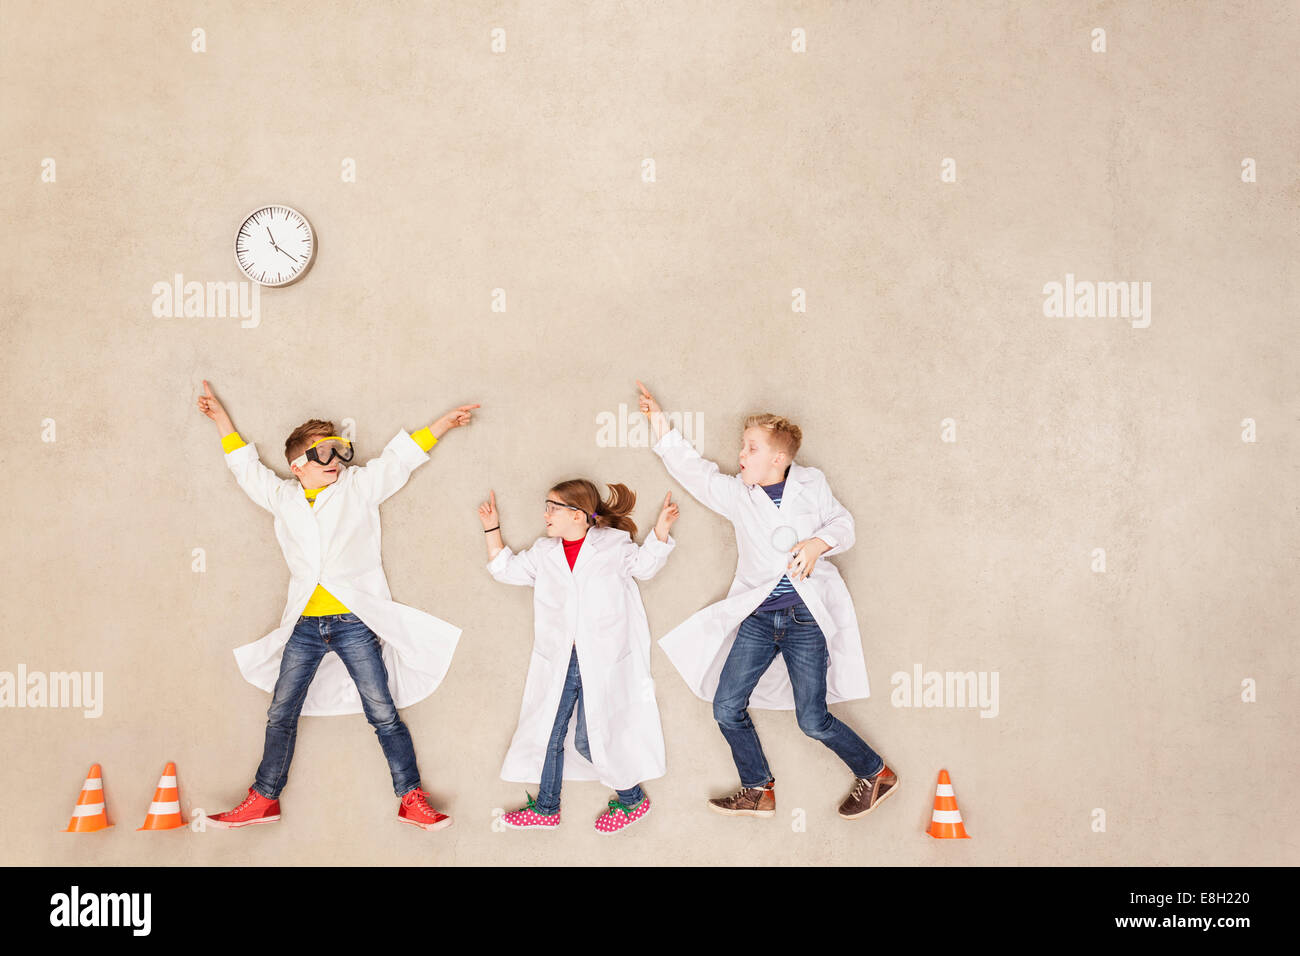 Researches under time pressure Stock Photo